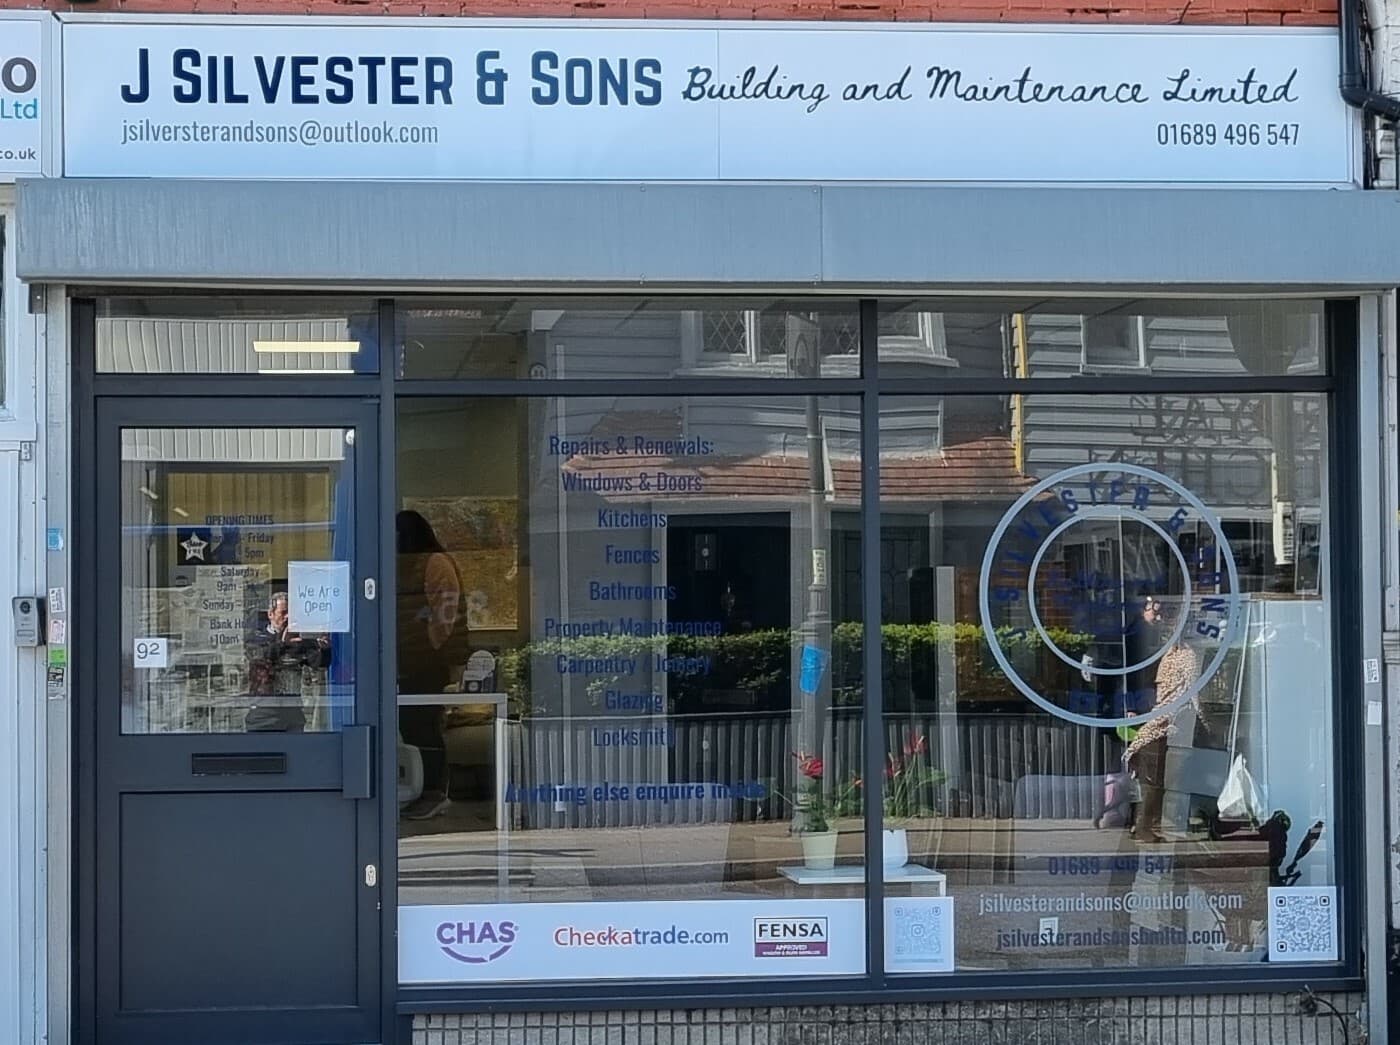 Silvester & Sons Building and Maintenance Limited